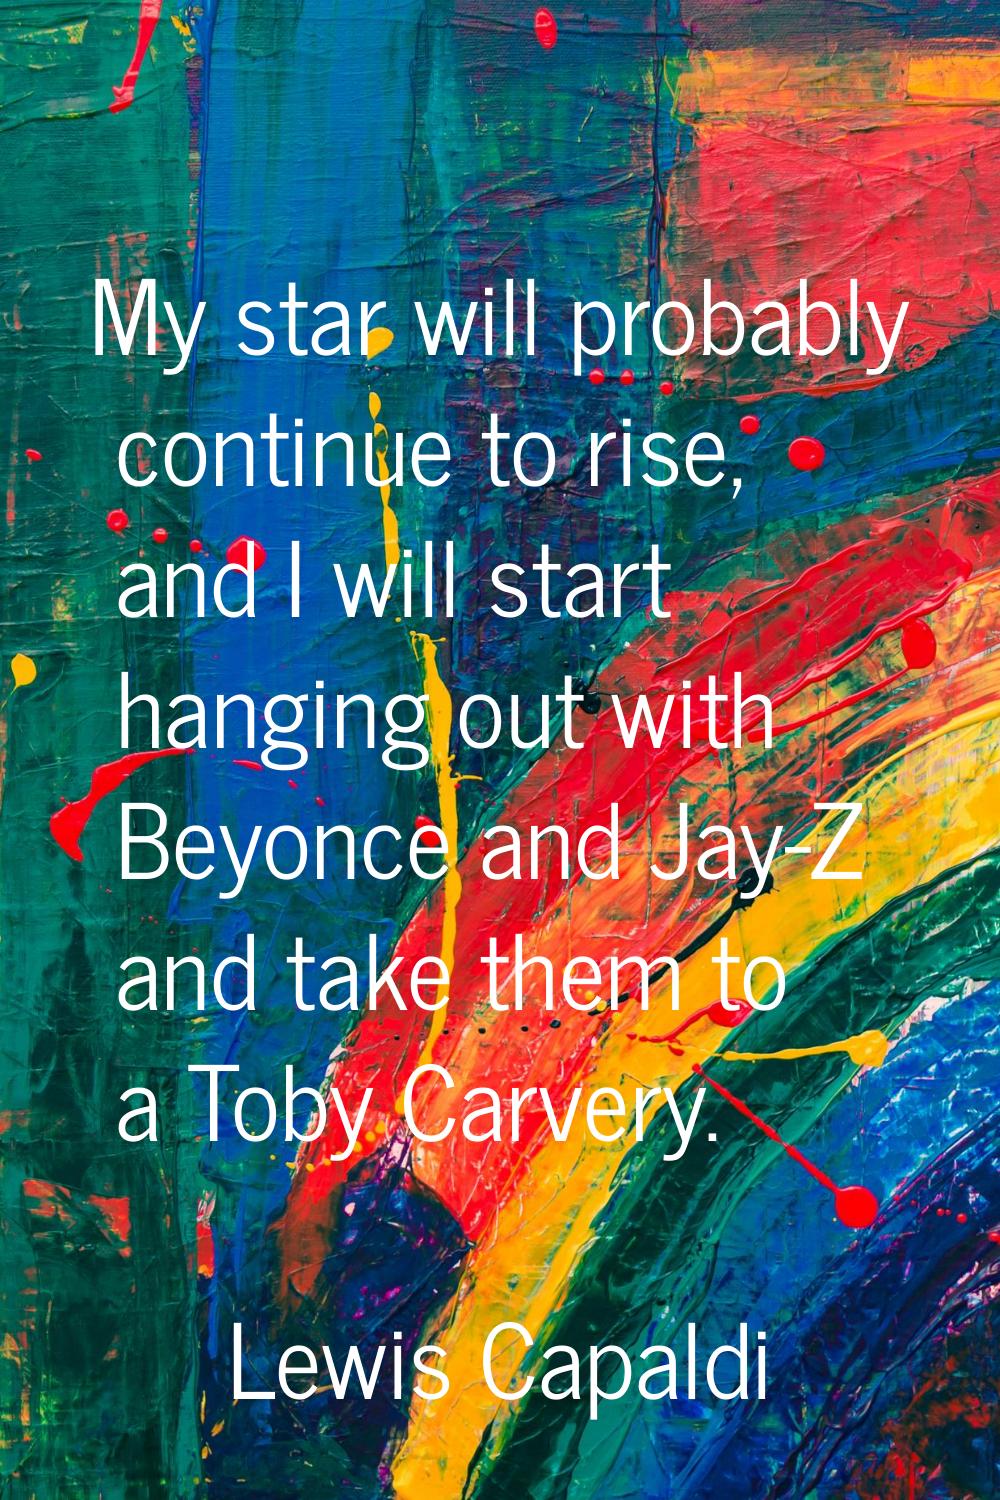 My star will probably continue to rise, and I will start hanging out with Beyonce and Jay-Z and tak